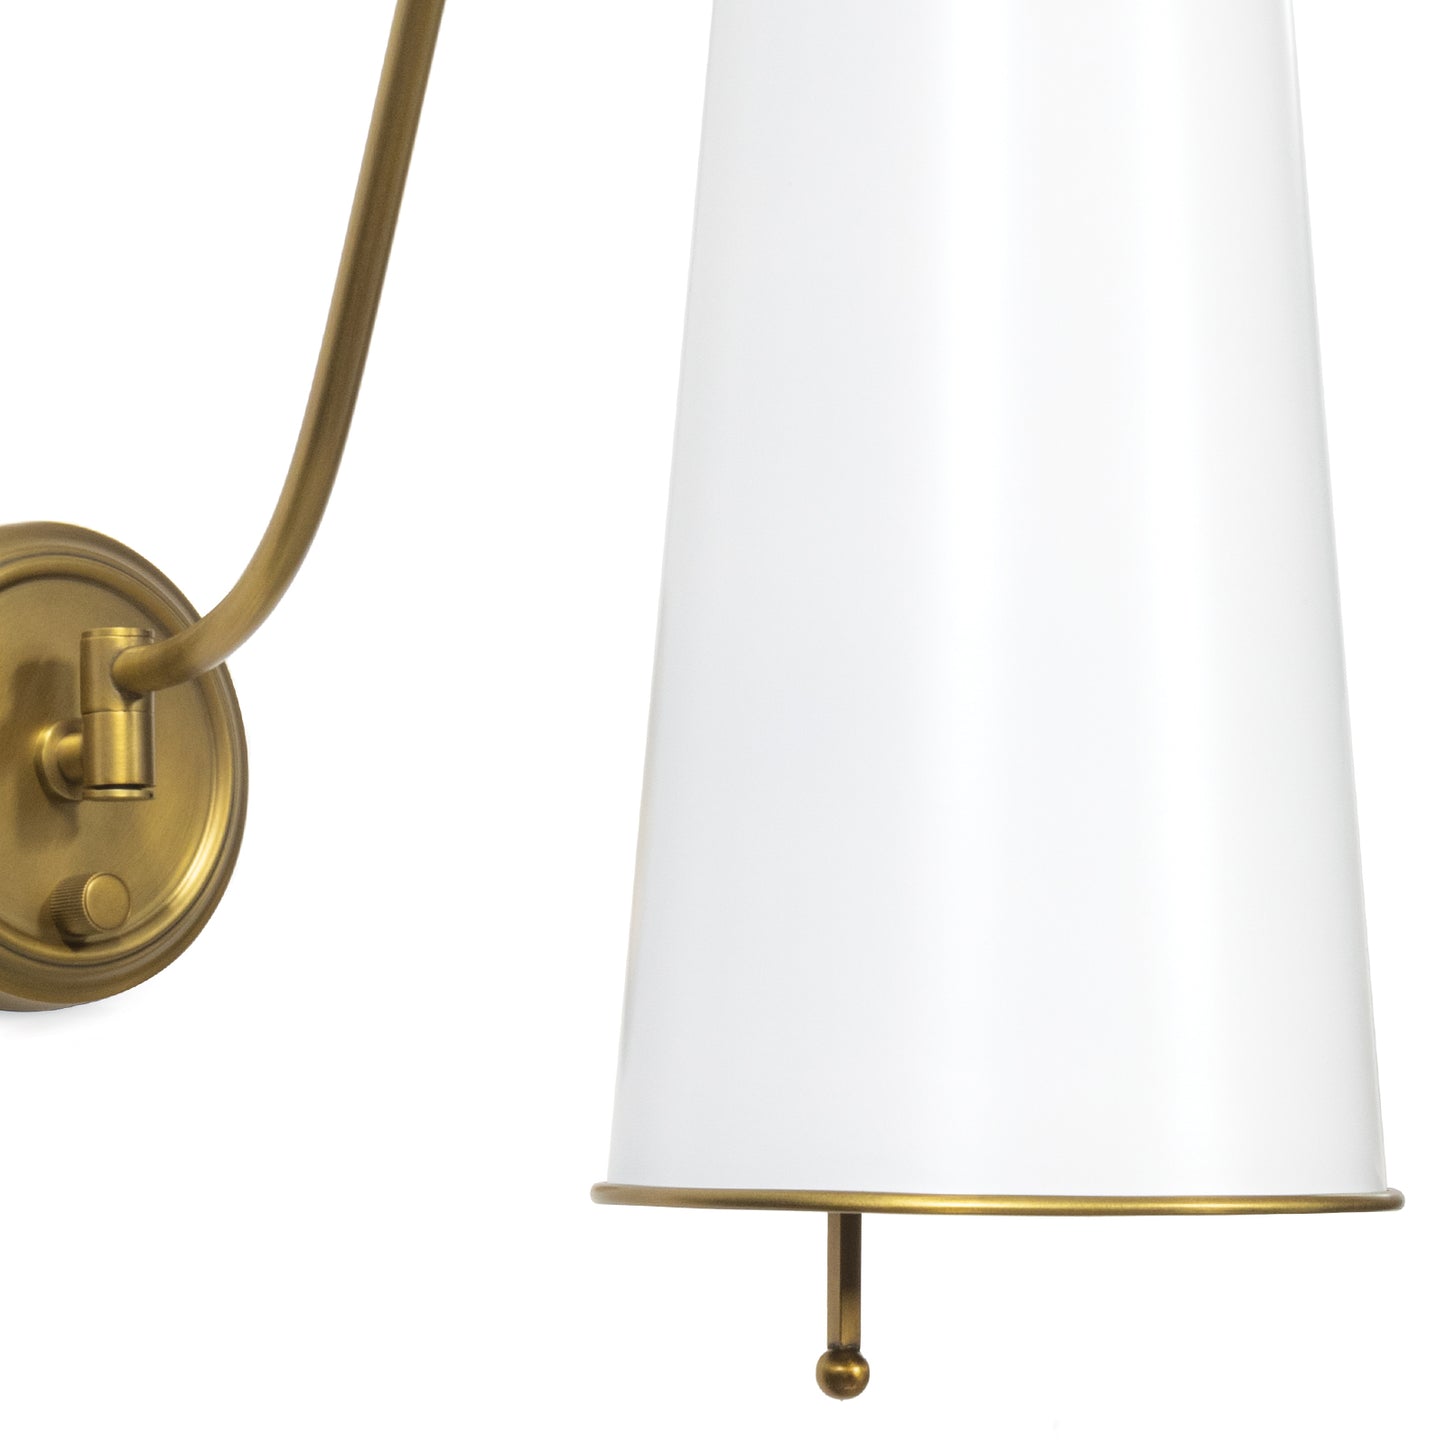 Hattie Sconce in White and Natural Brass by Regina Andrew